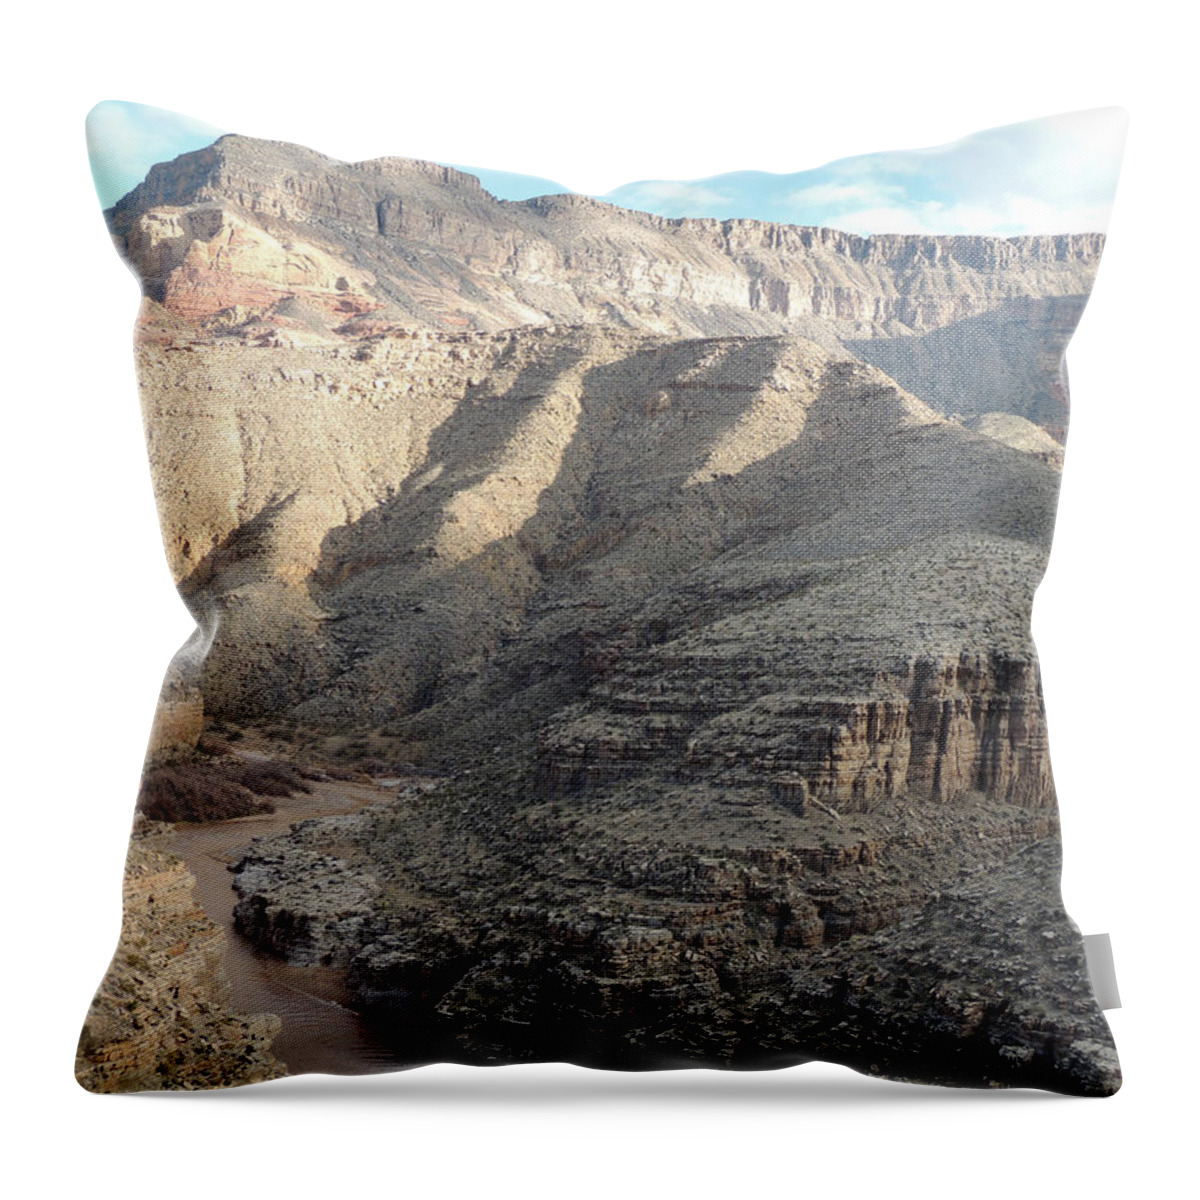 Desert Landscape Throw Pillow featuring the photograph Virgin River Gorge AZ 2113 by Andrew Chambers